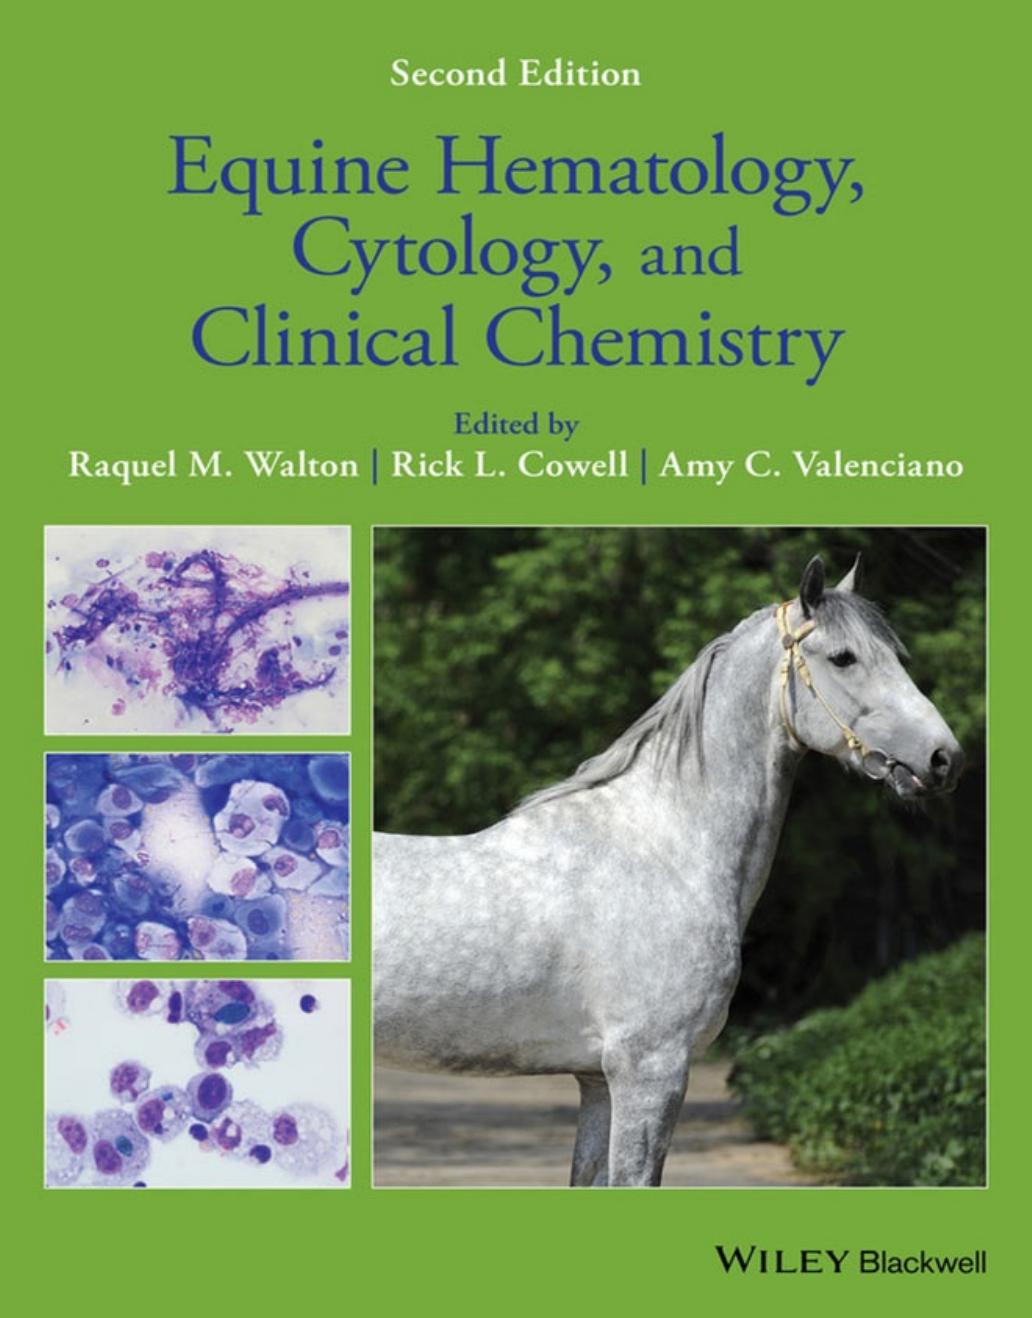 Equine Hematology, Cytology, and Clinical Chemistry 2nd Edition 2021